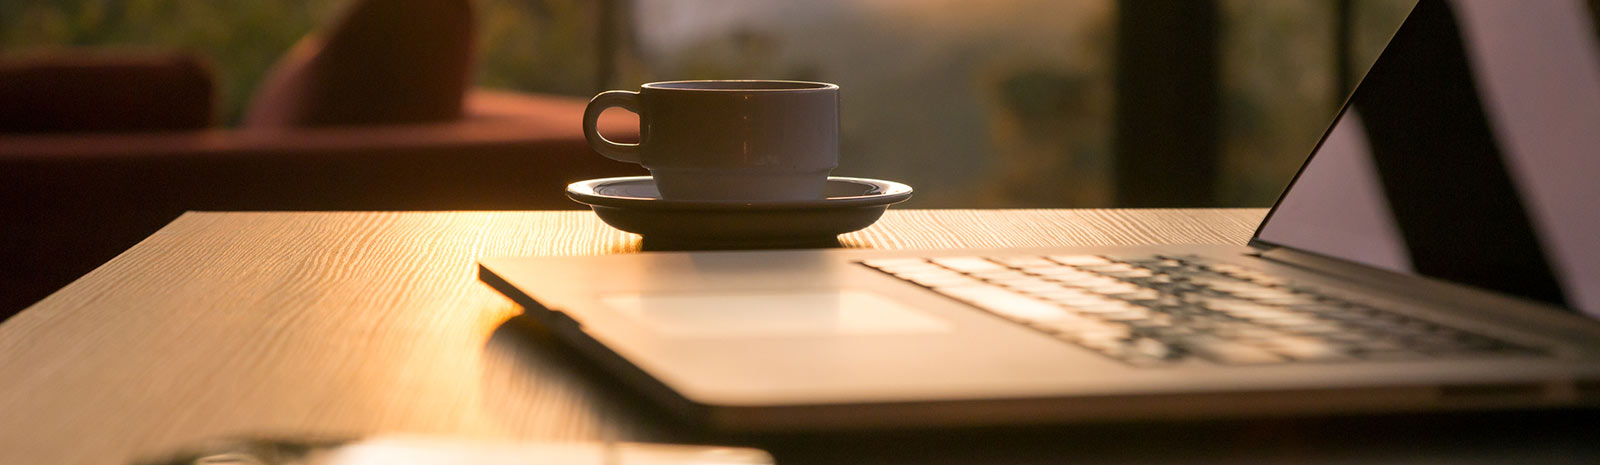 a laptop and coffee cup sitting on a tablet